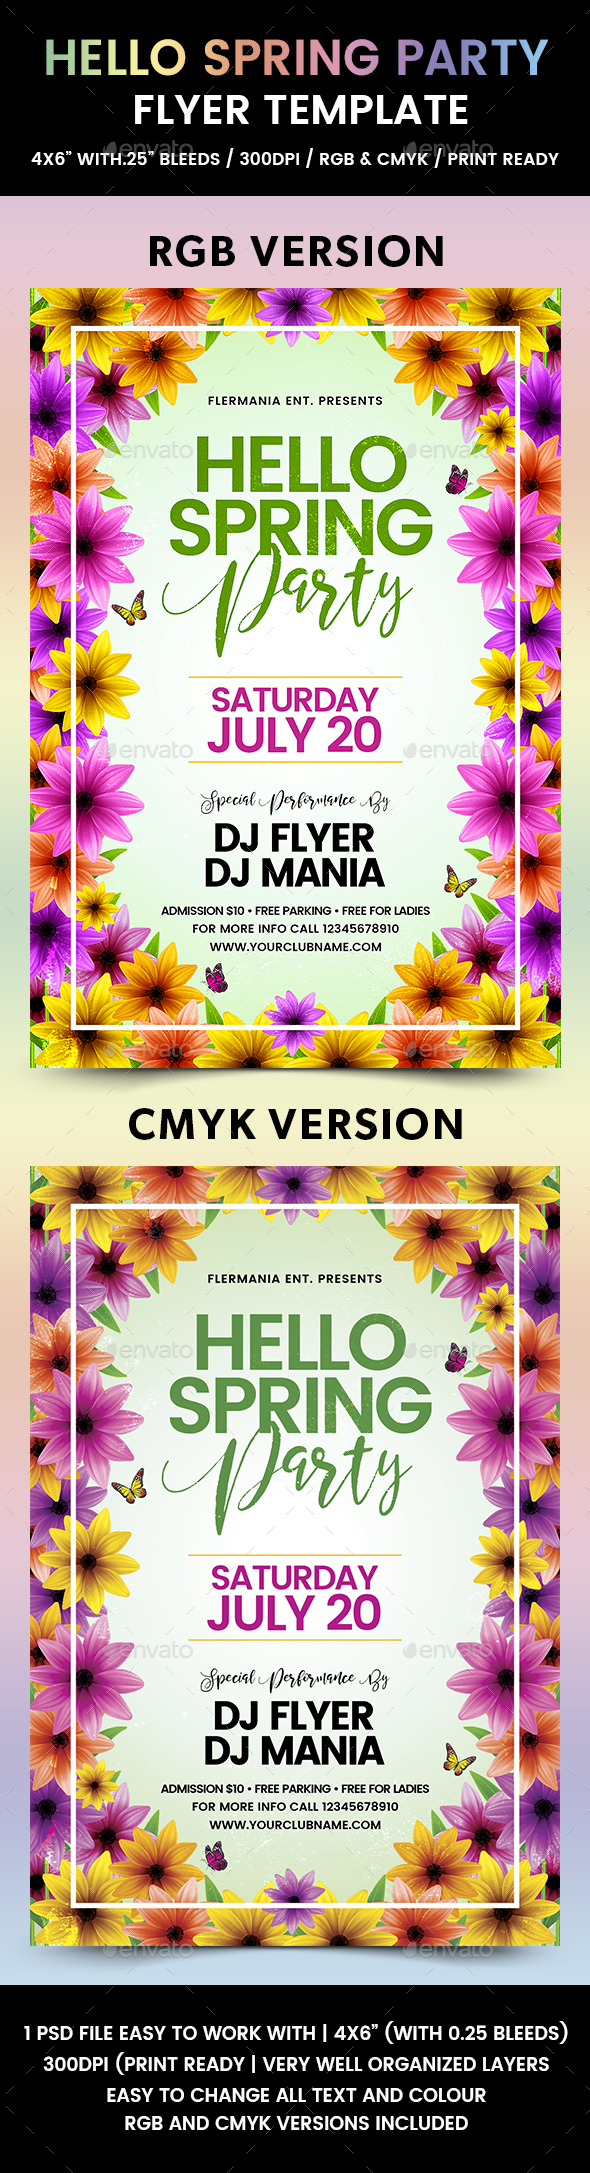 Hello Spring Party Flyer Template